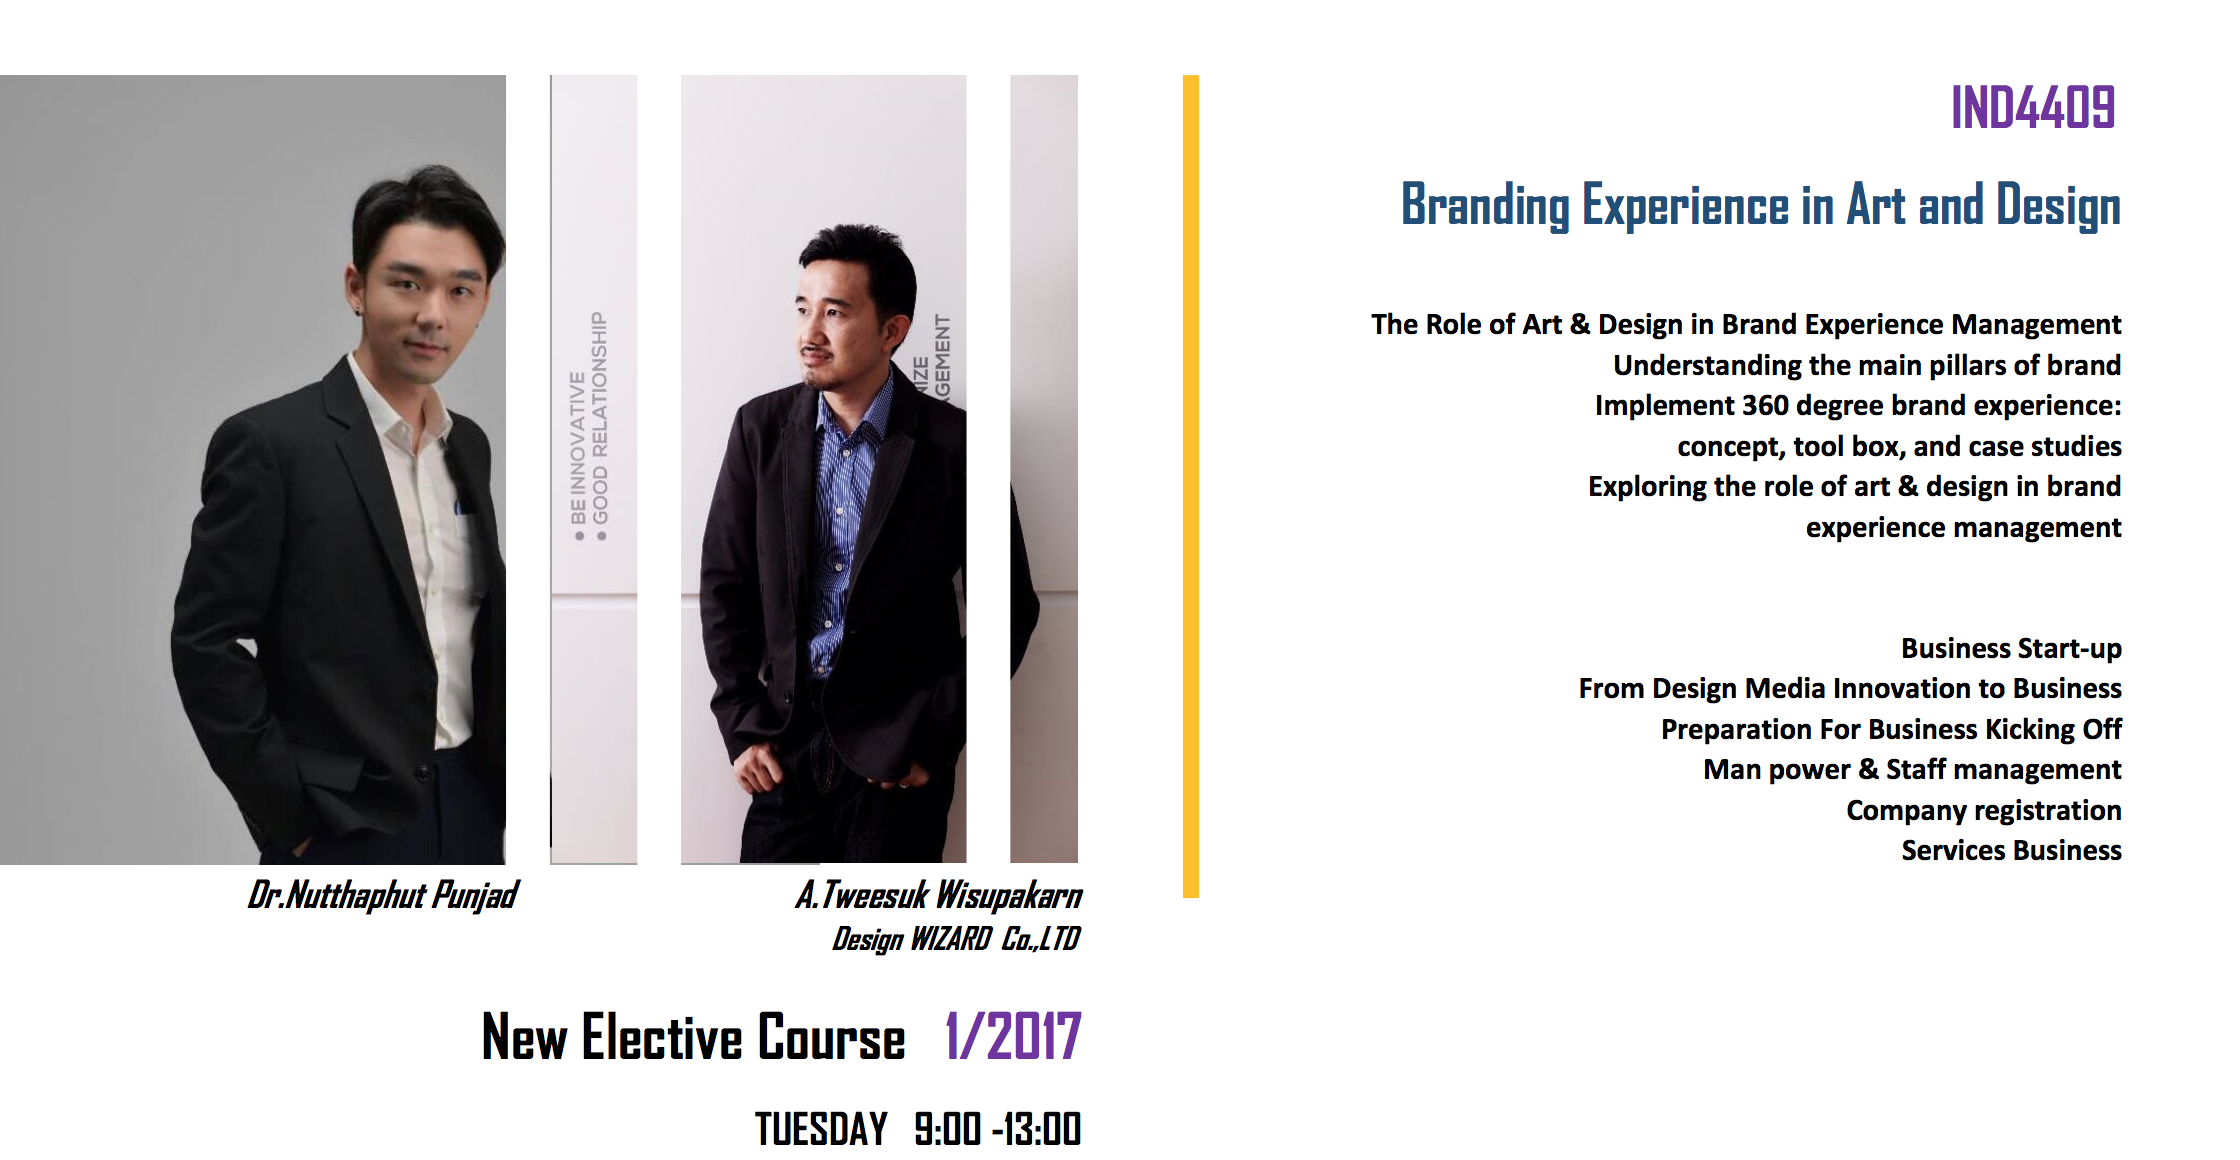 New Elective Course 1/2017 IND4409 Branding Experience in Art and Design